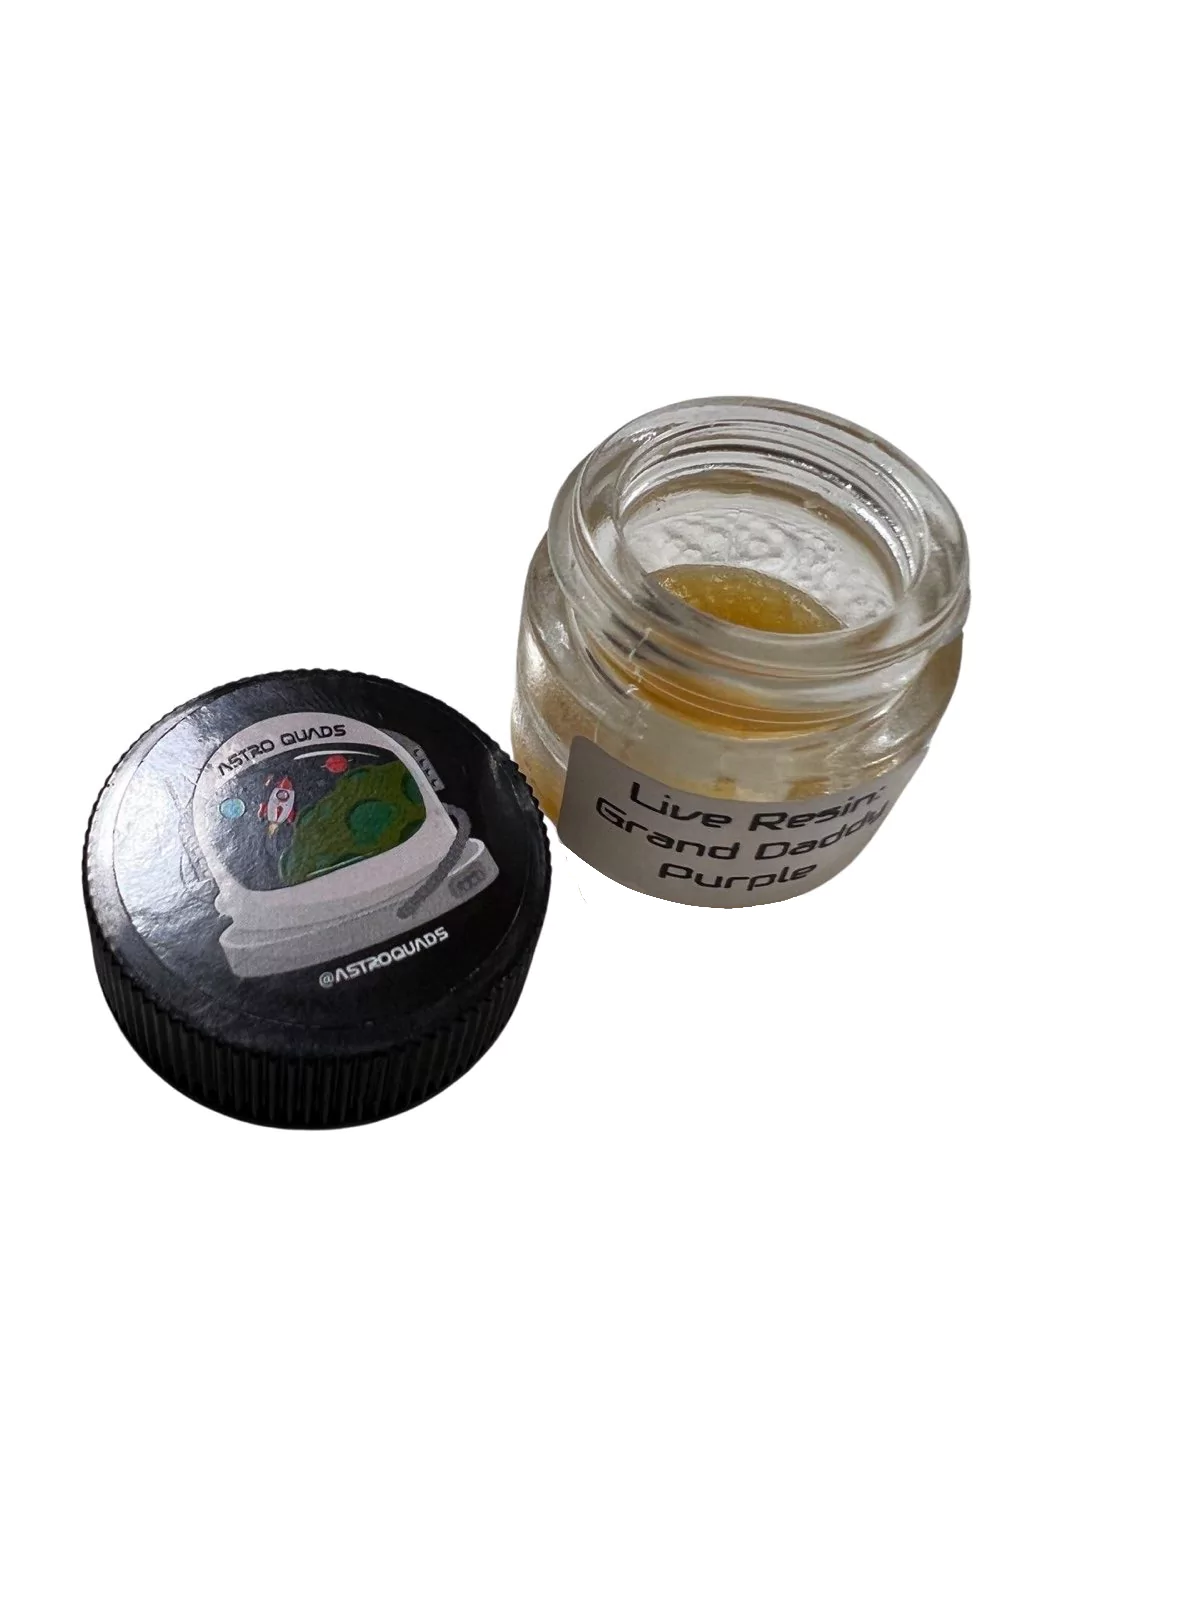 AAAA PACKAGED LIVE RESIN BY ASTRO QUADS